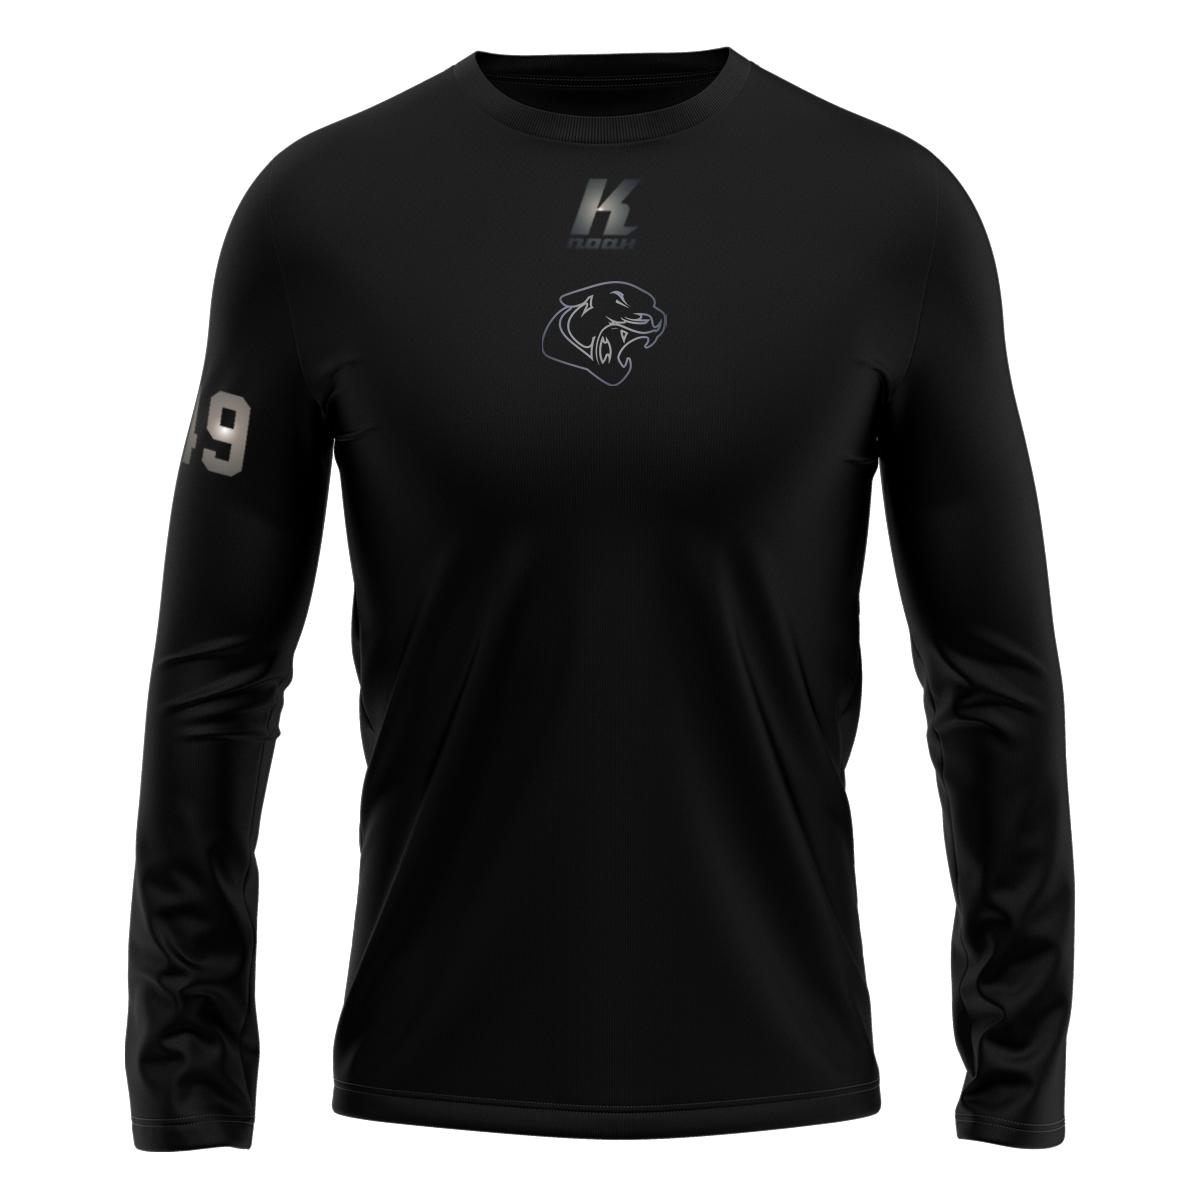 Cougars "Blackline" K.Tech Longsleeve Tee L02071 with Playernumber/Initials